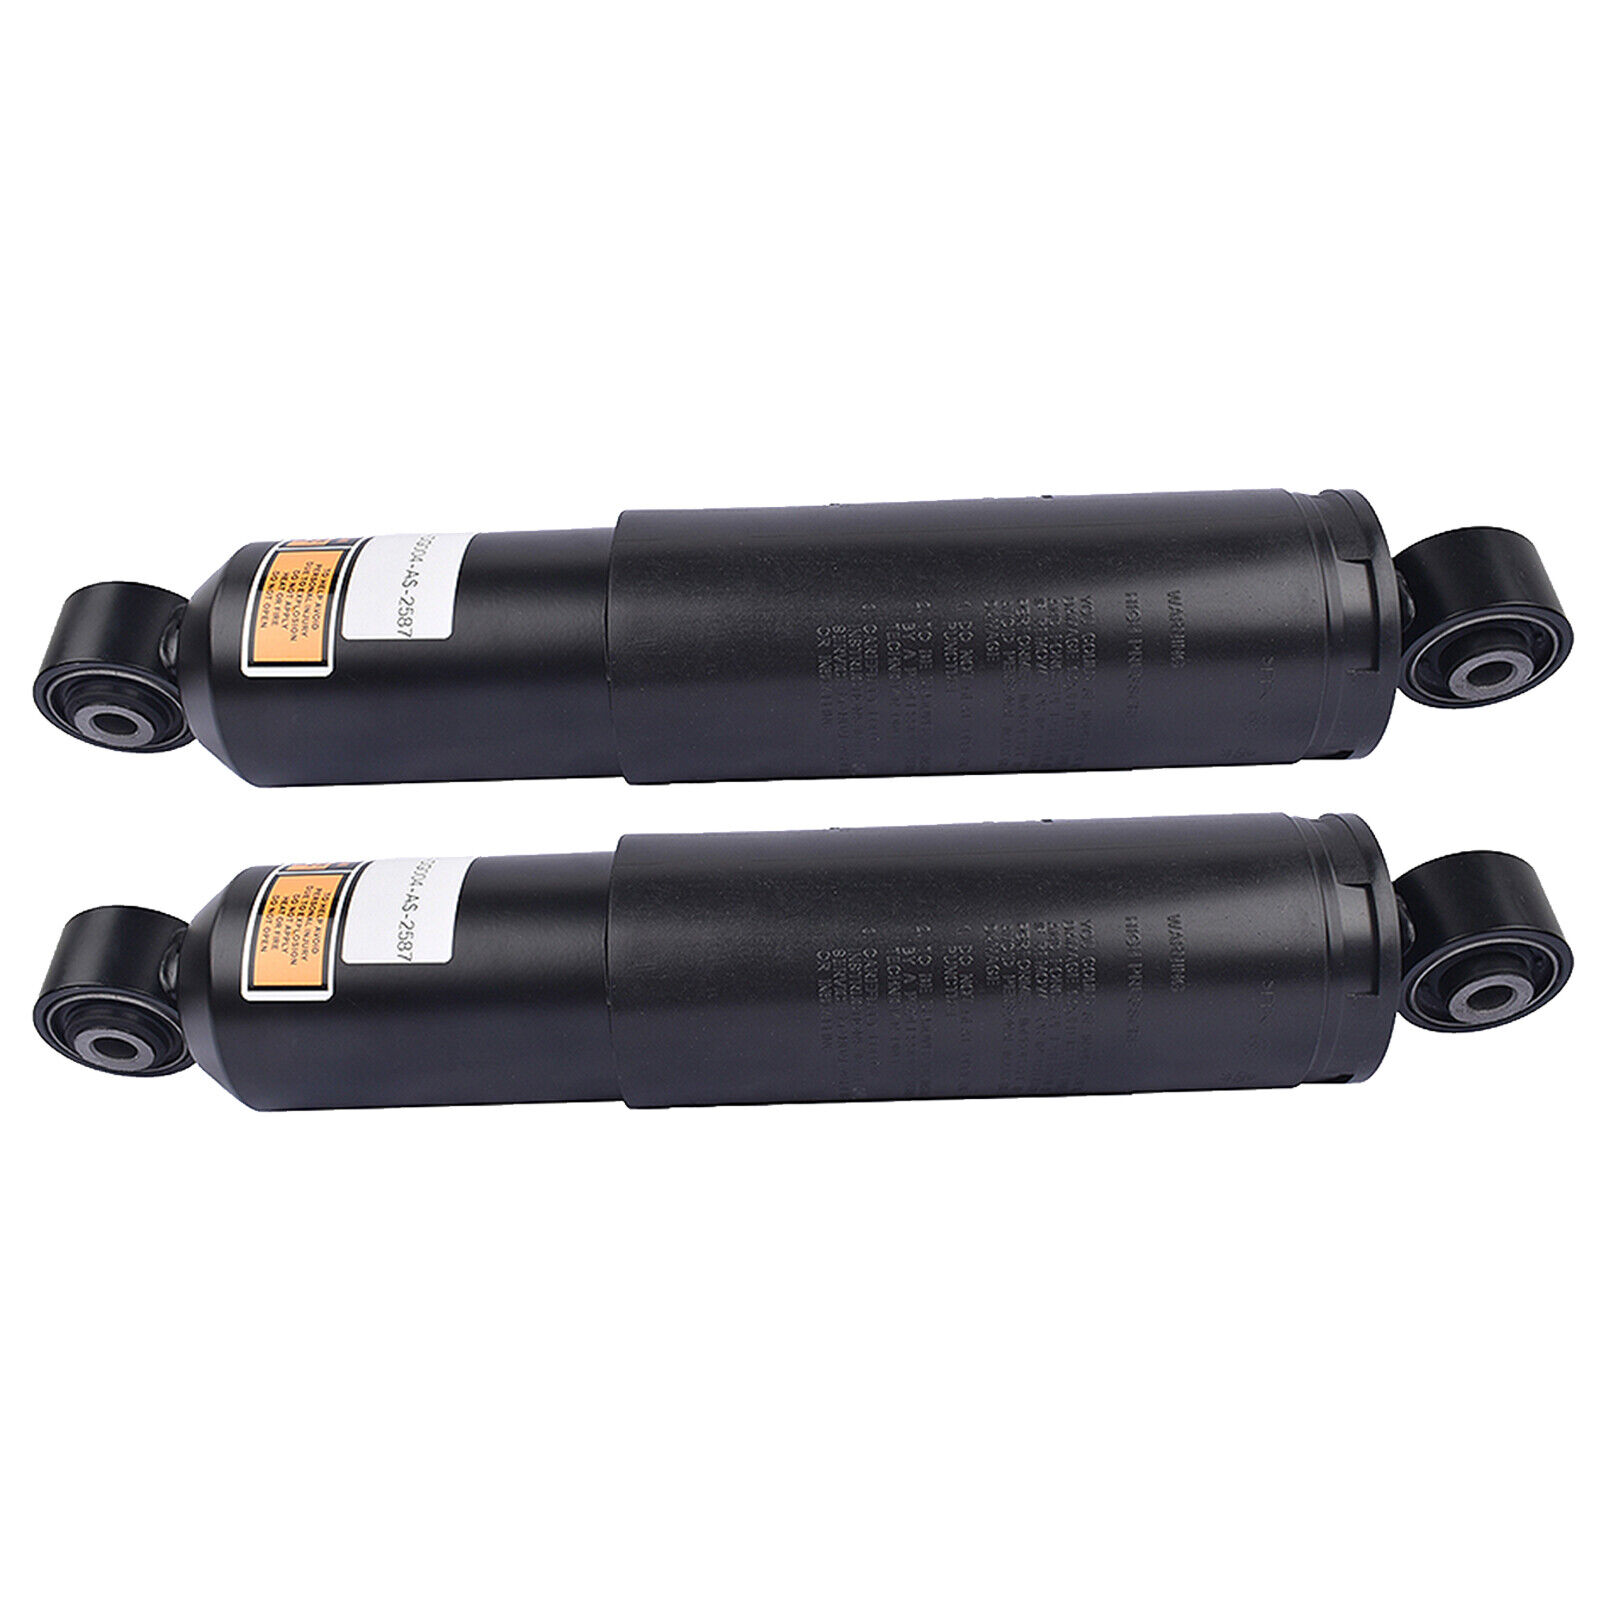 2x Rear Shock Absorbers For 12-16 Chrysler Town & Country Dodge Grand Caravan